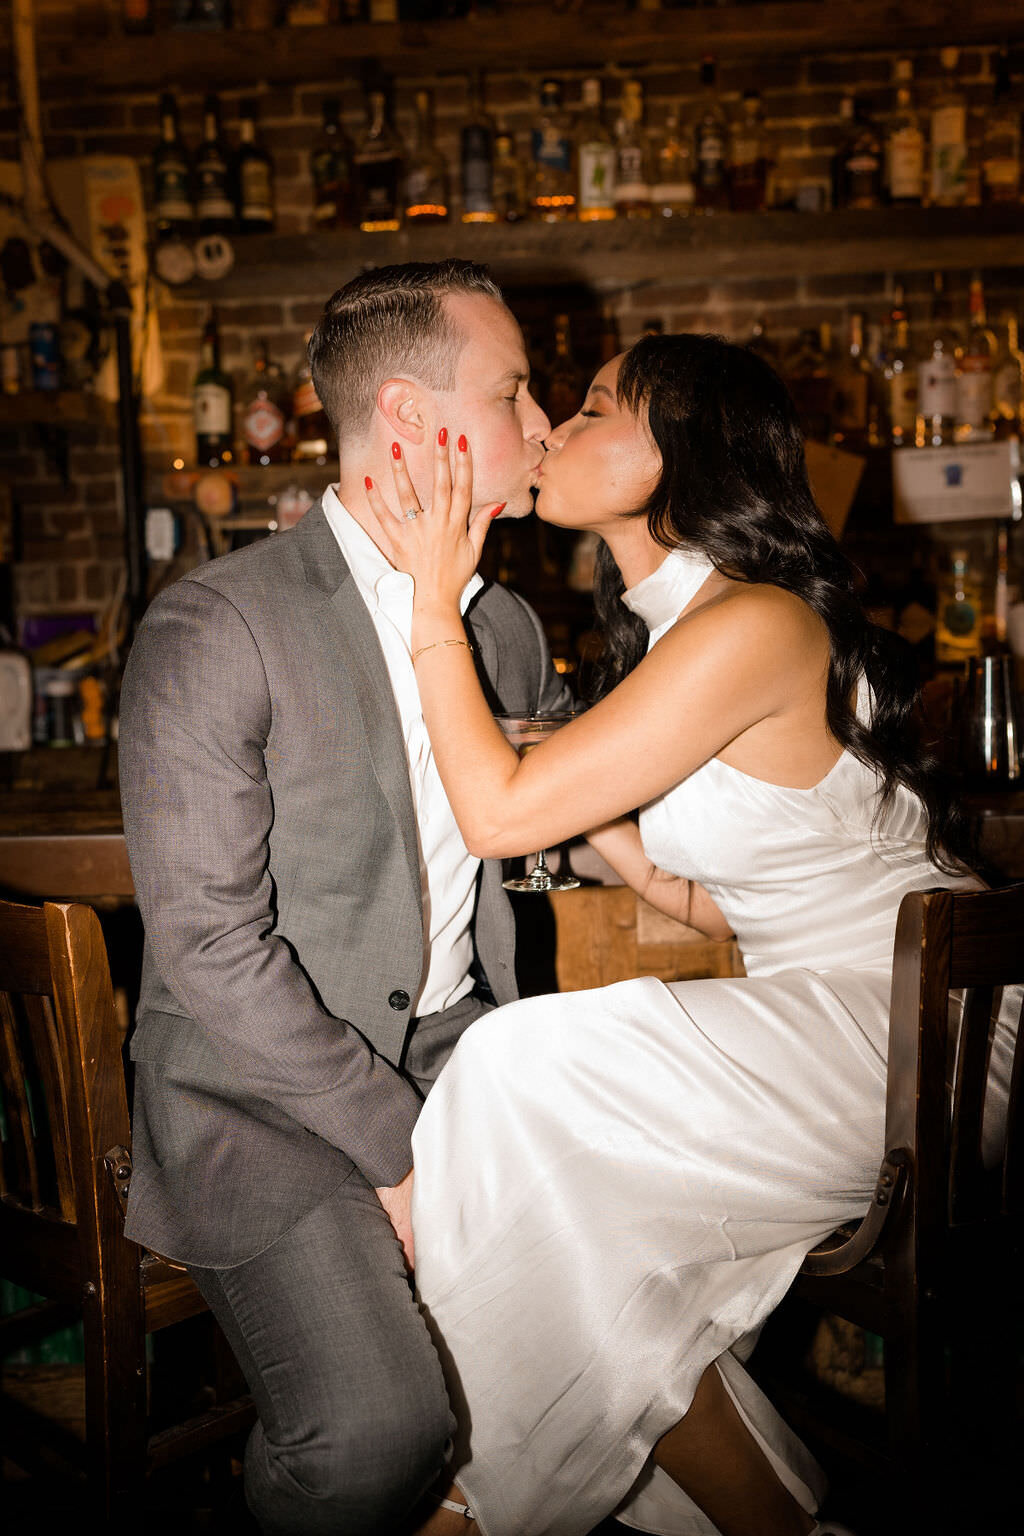 bride and groom sitting in chairs at a bar kissing each other